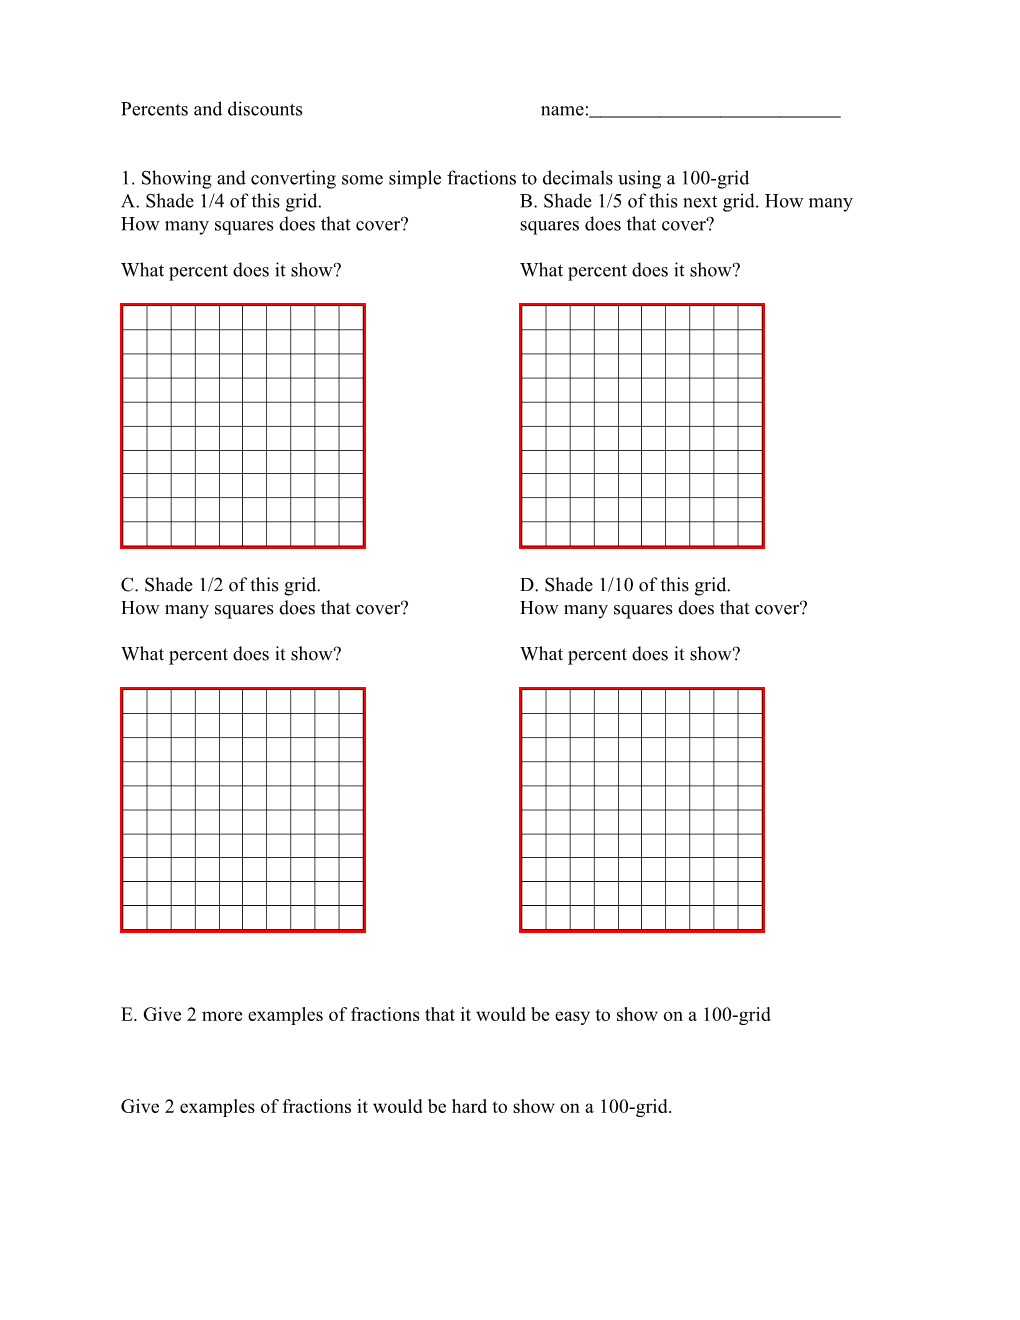 E. Give 2 More Examples of Fractions That It Would Be Easy to Show on a 100-Grid